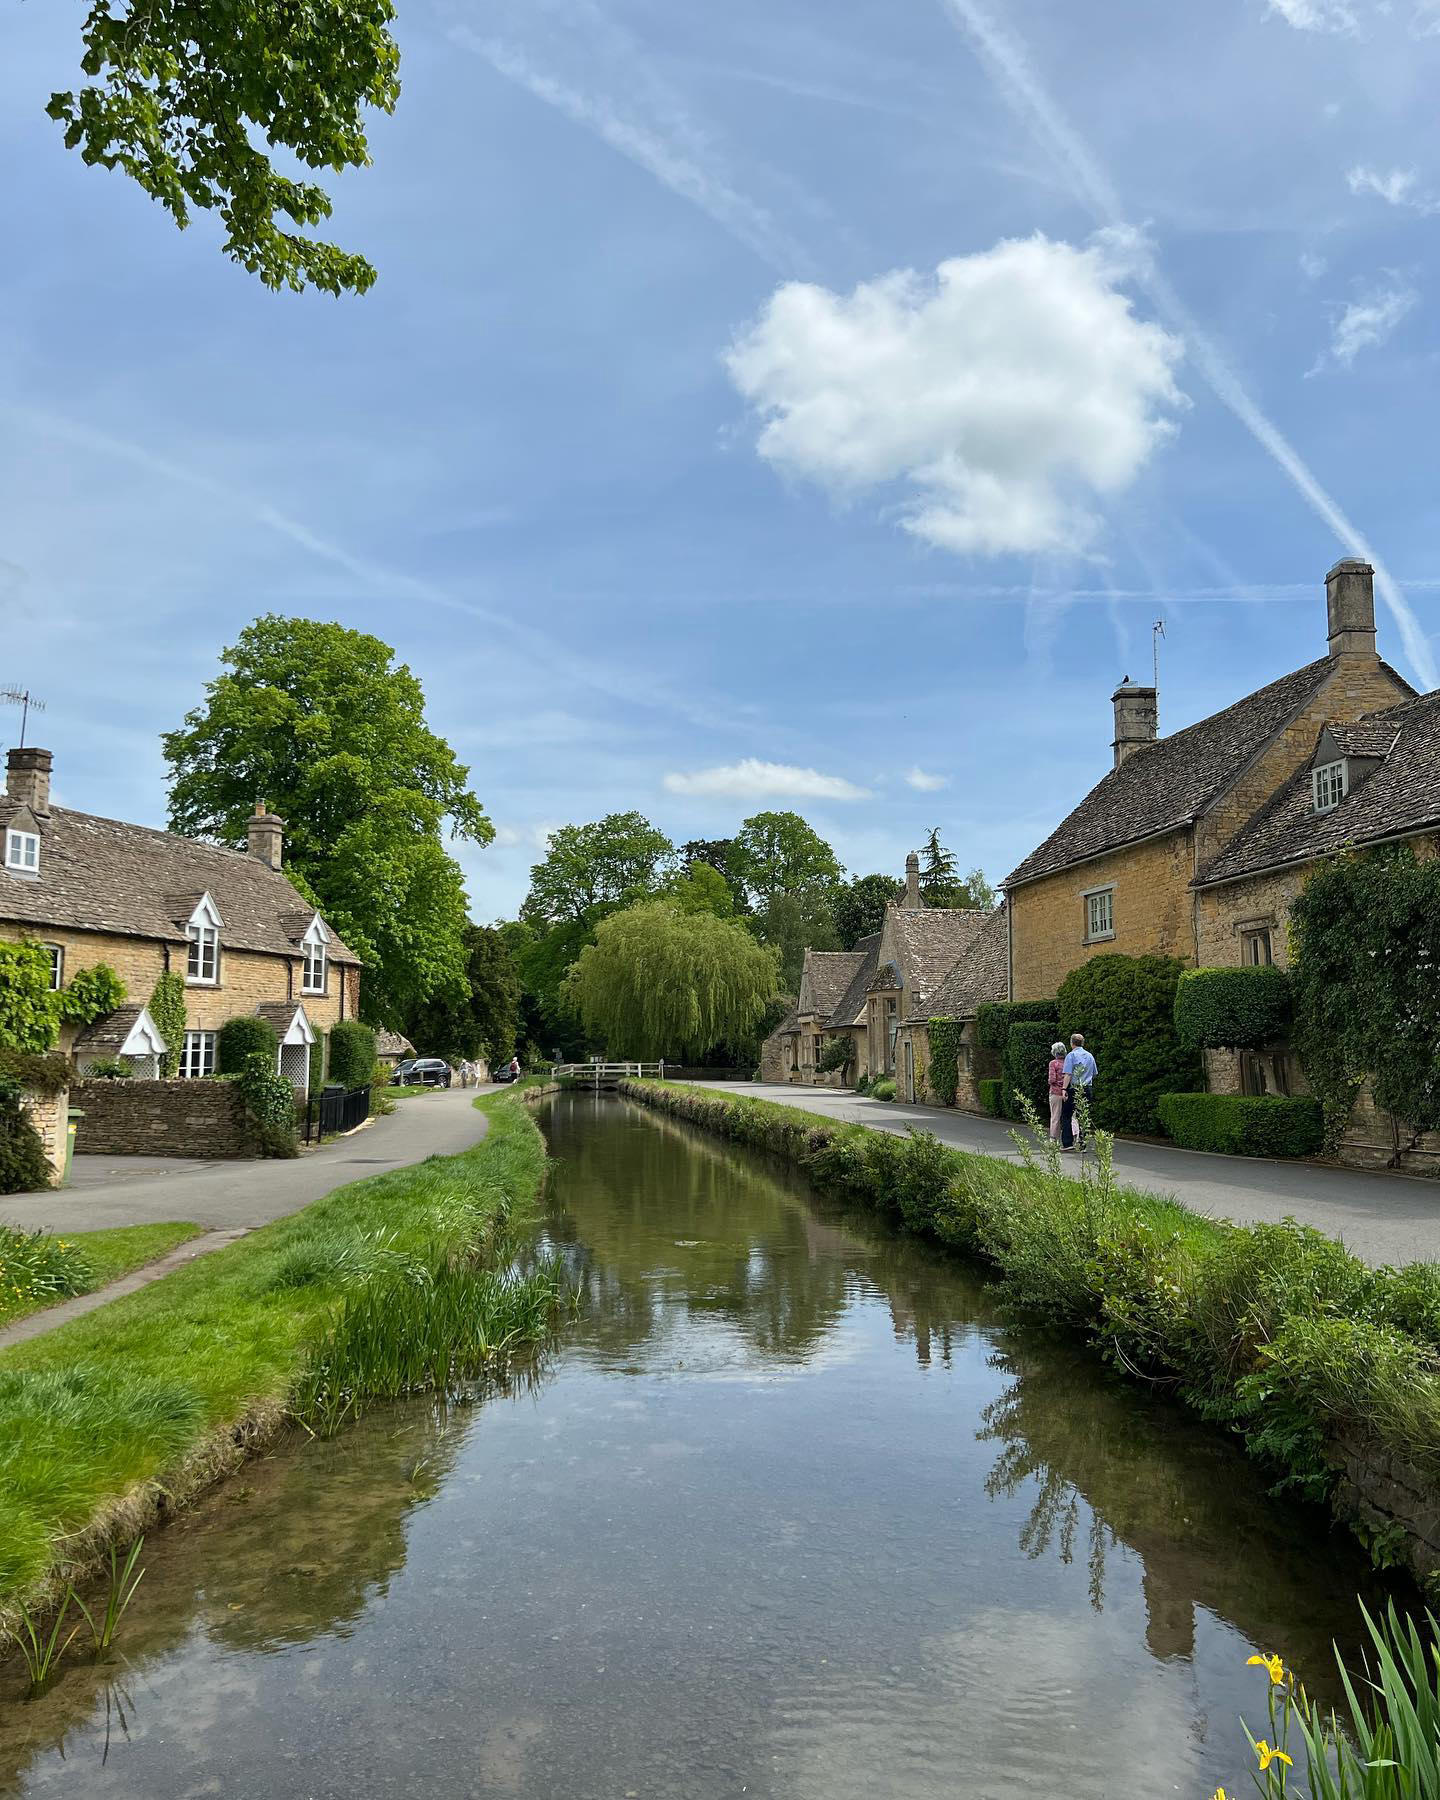 image  1 All Things England - Lower Slaughter - it feels like time has stopped in this beautiful #Cotswolds